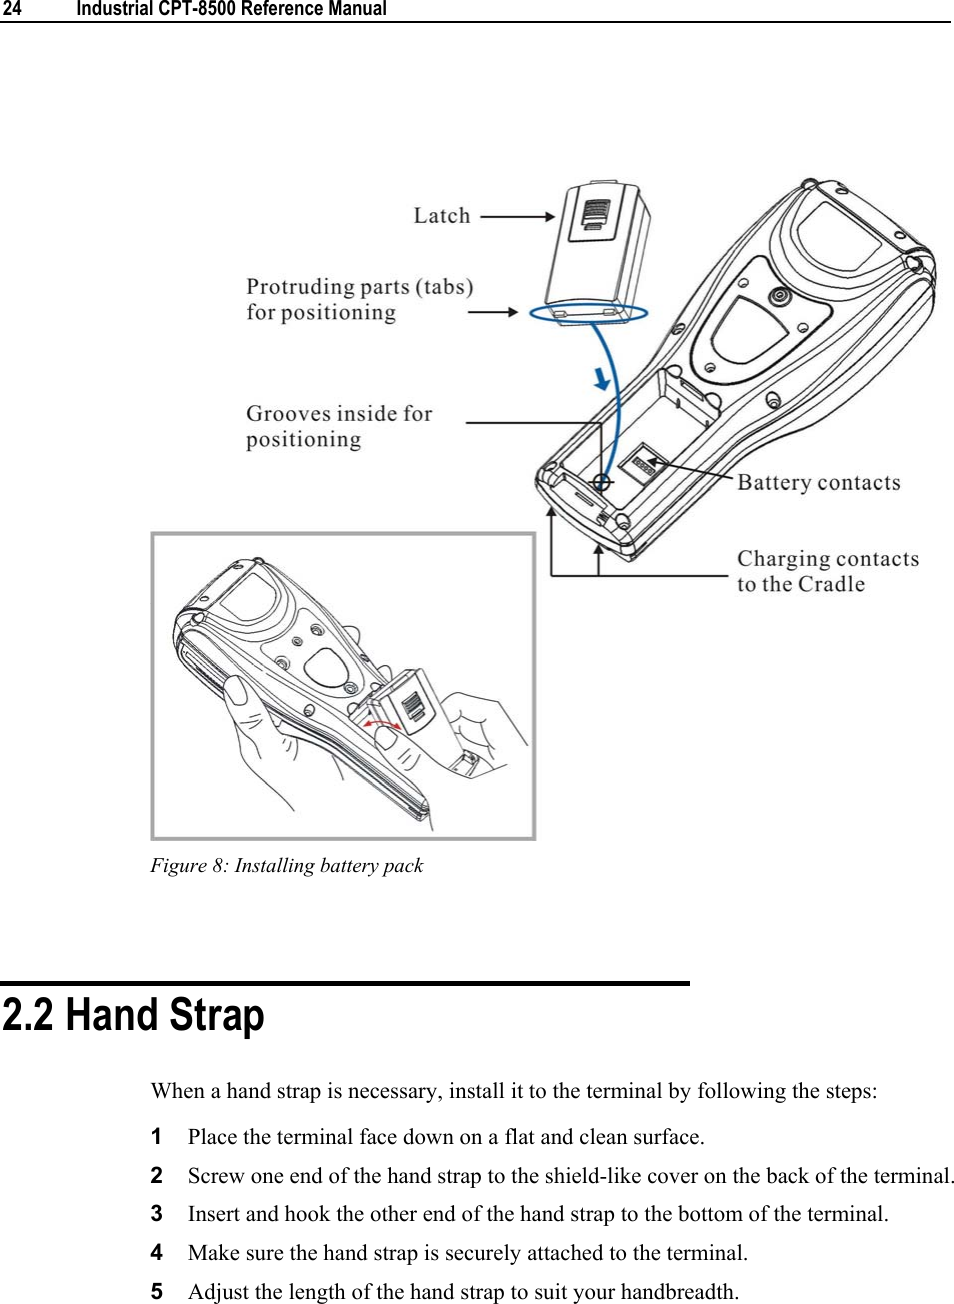  24  Industrial CPT-8500 Reference Manual    Figure 8: Installing battery pack   2.2 Hand Strap When a hand strap is necessary, install it to the terminal by following the steps: 1  Place the terminal face down on a flat and clean surface. 2  Screw one end of the hand strap to the shield-like cover on the back of the terminal. 3  Insert and hook the other end of the hand strap to the bottom of the terminal. 4  Make sure the hand strap is securely attached to the terminal. 5  Adjust the length of the hand strap to suit your handbreadth. 